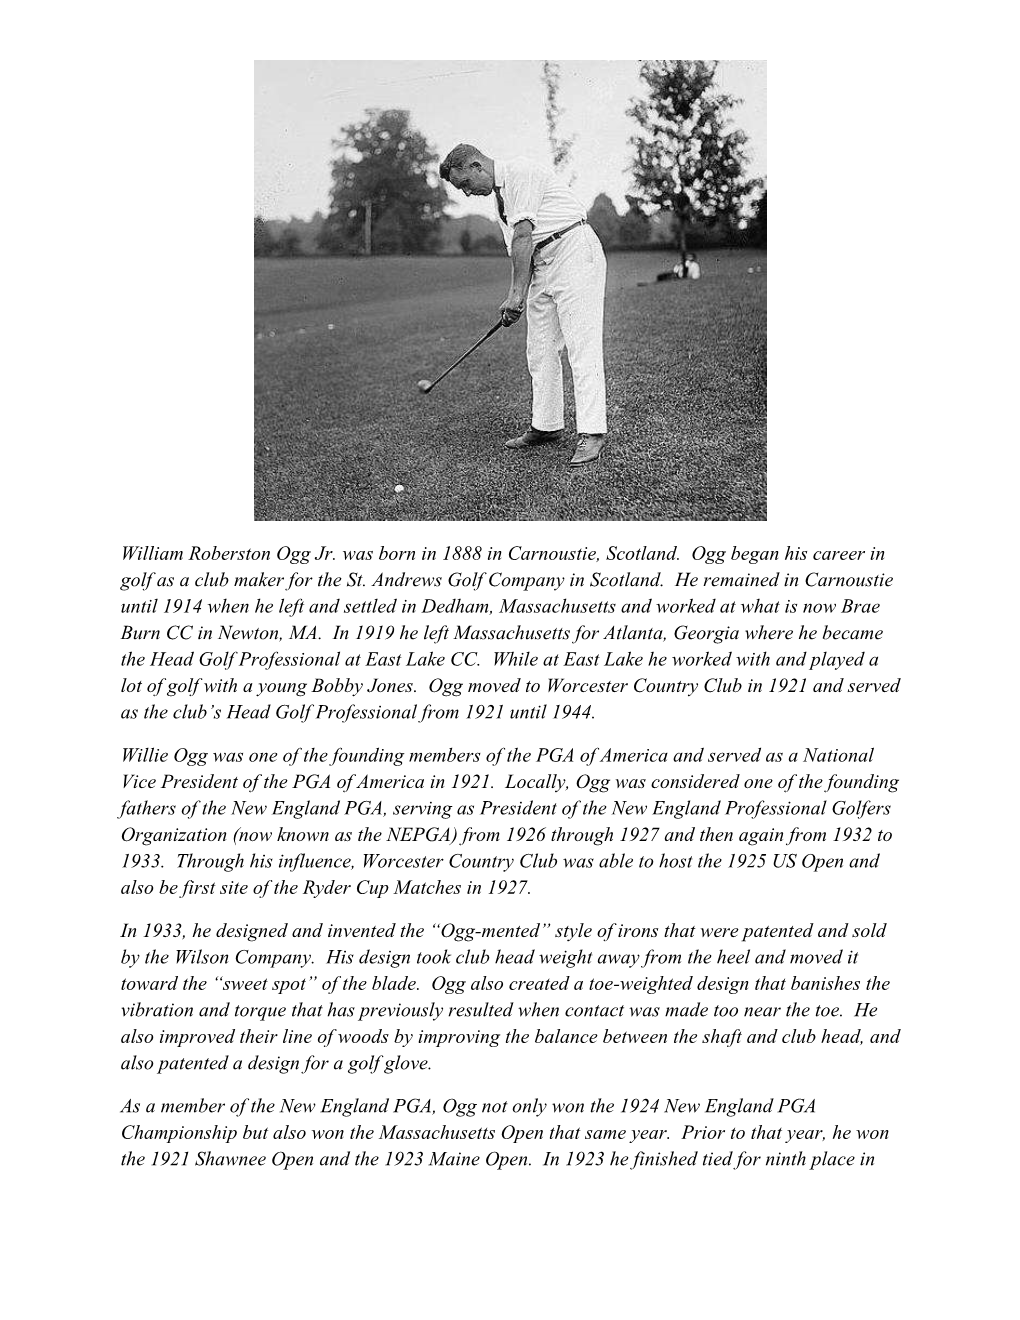 William Roberston Ogg Jr. Was Born in 1888 in Carnoustie, Scotland. Ogg Began His Career in Golf As a Club Maker for the St